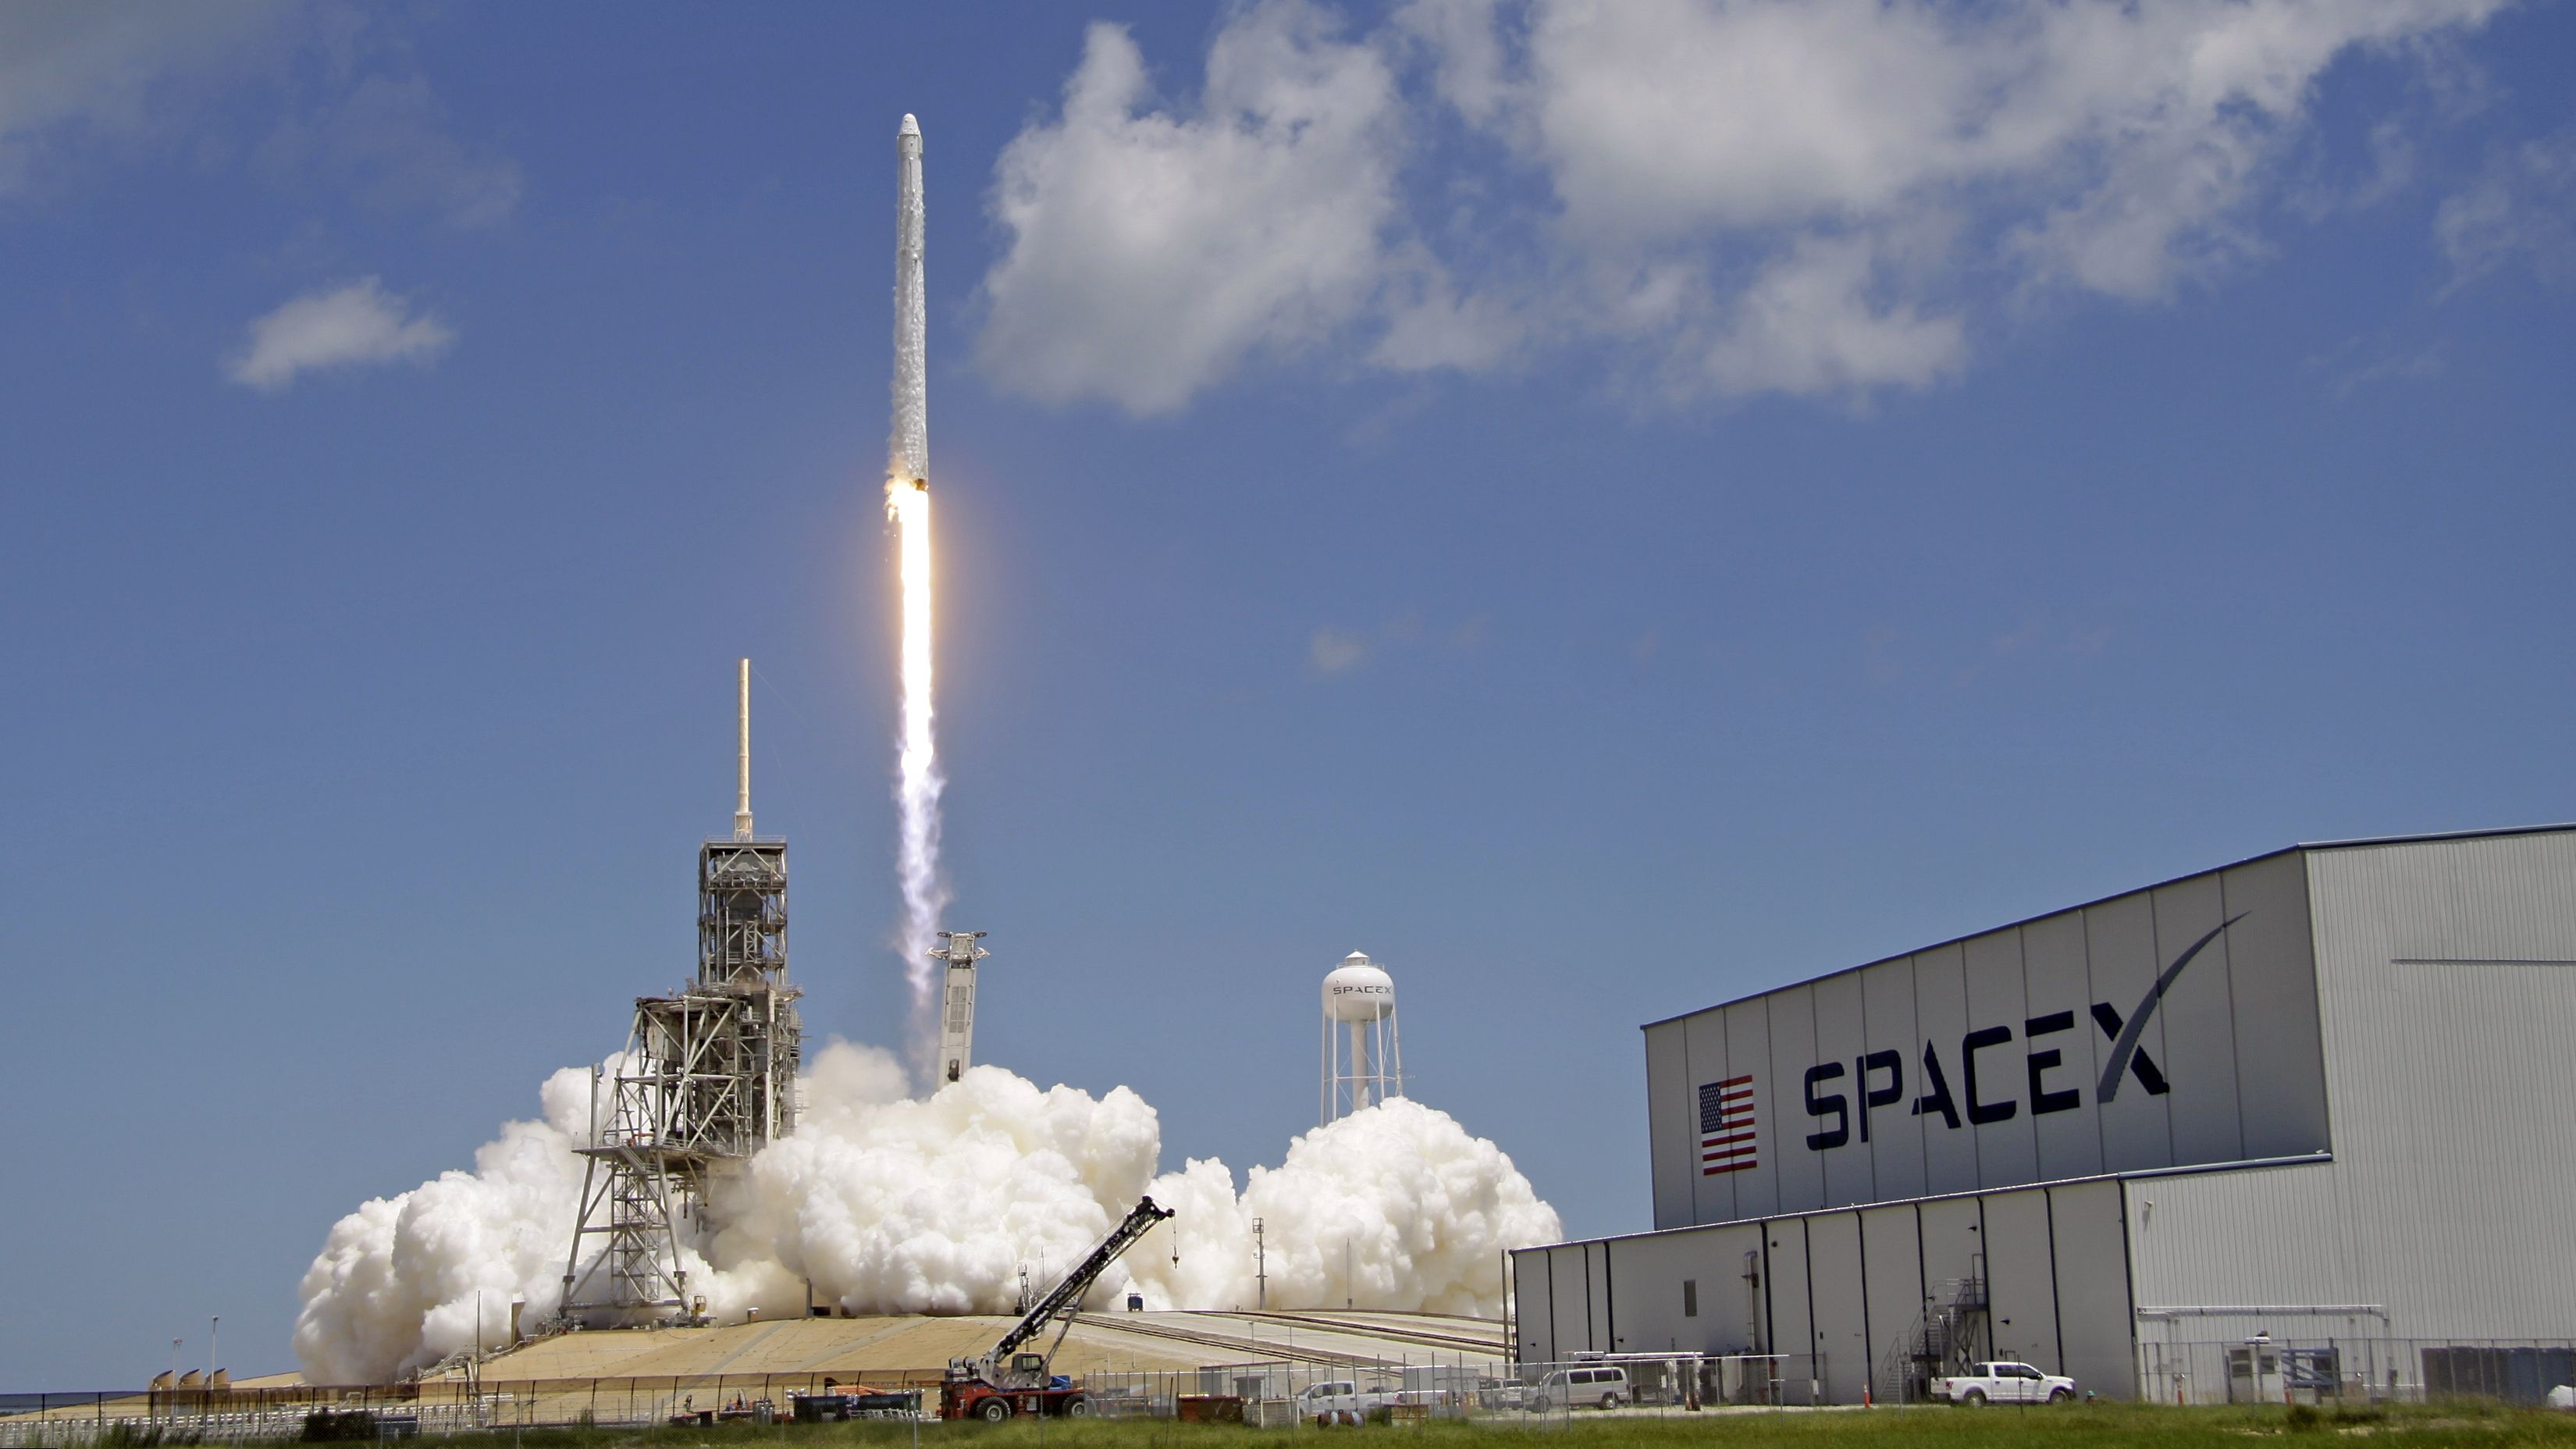 spacex-rocket-launch-how-to-watch.jpg